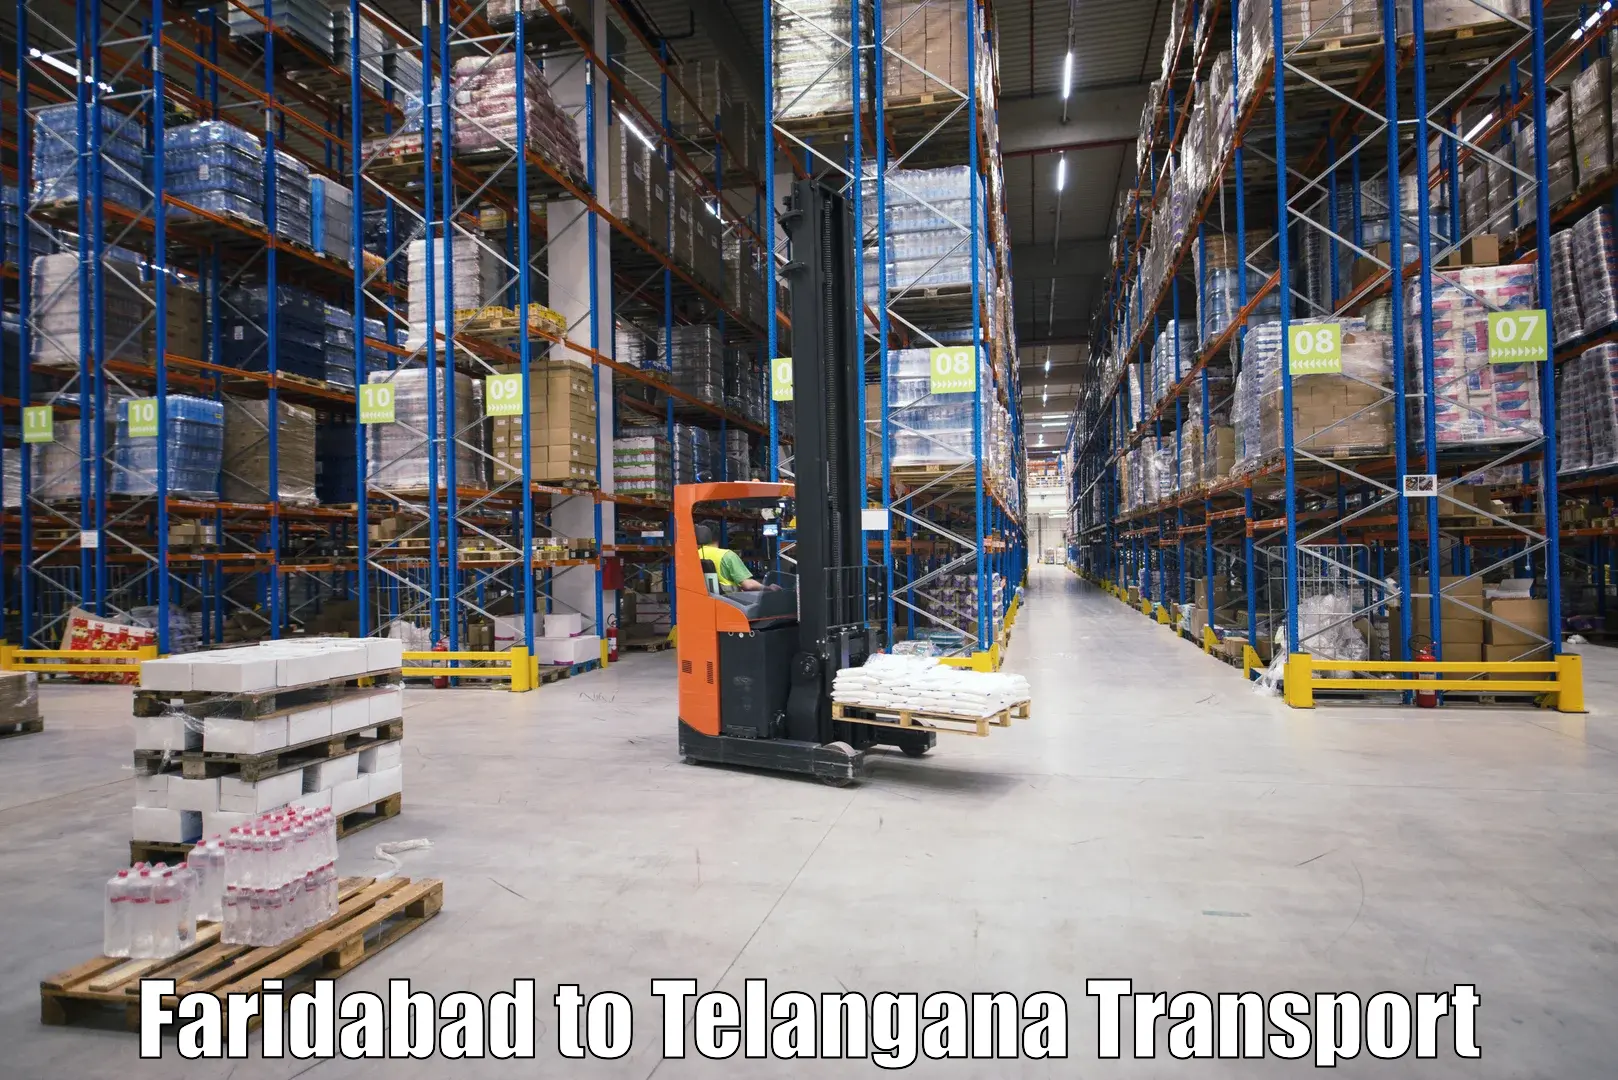 Transport shared services Faridabad to Hyderabad